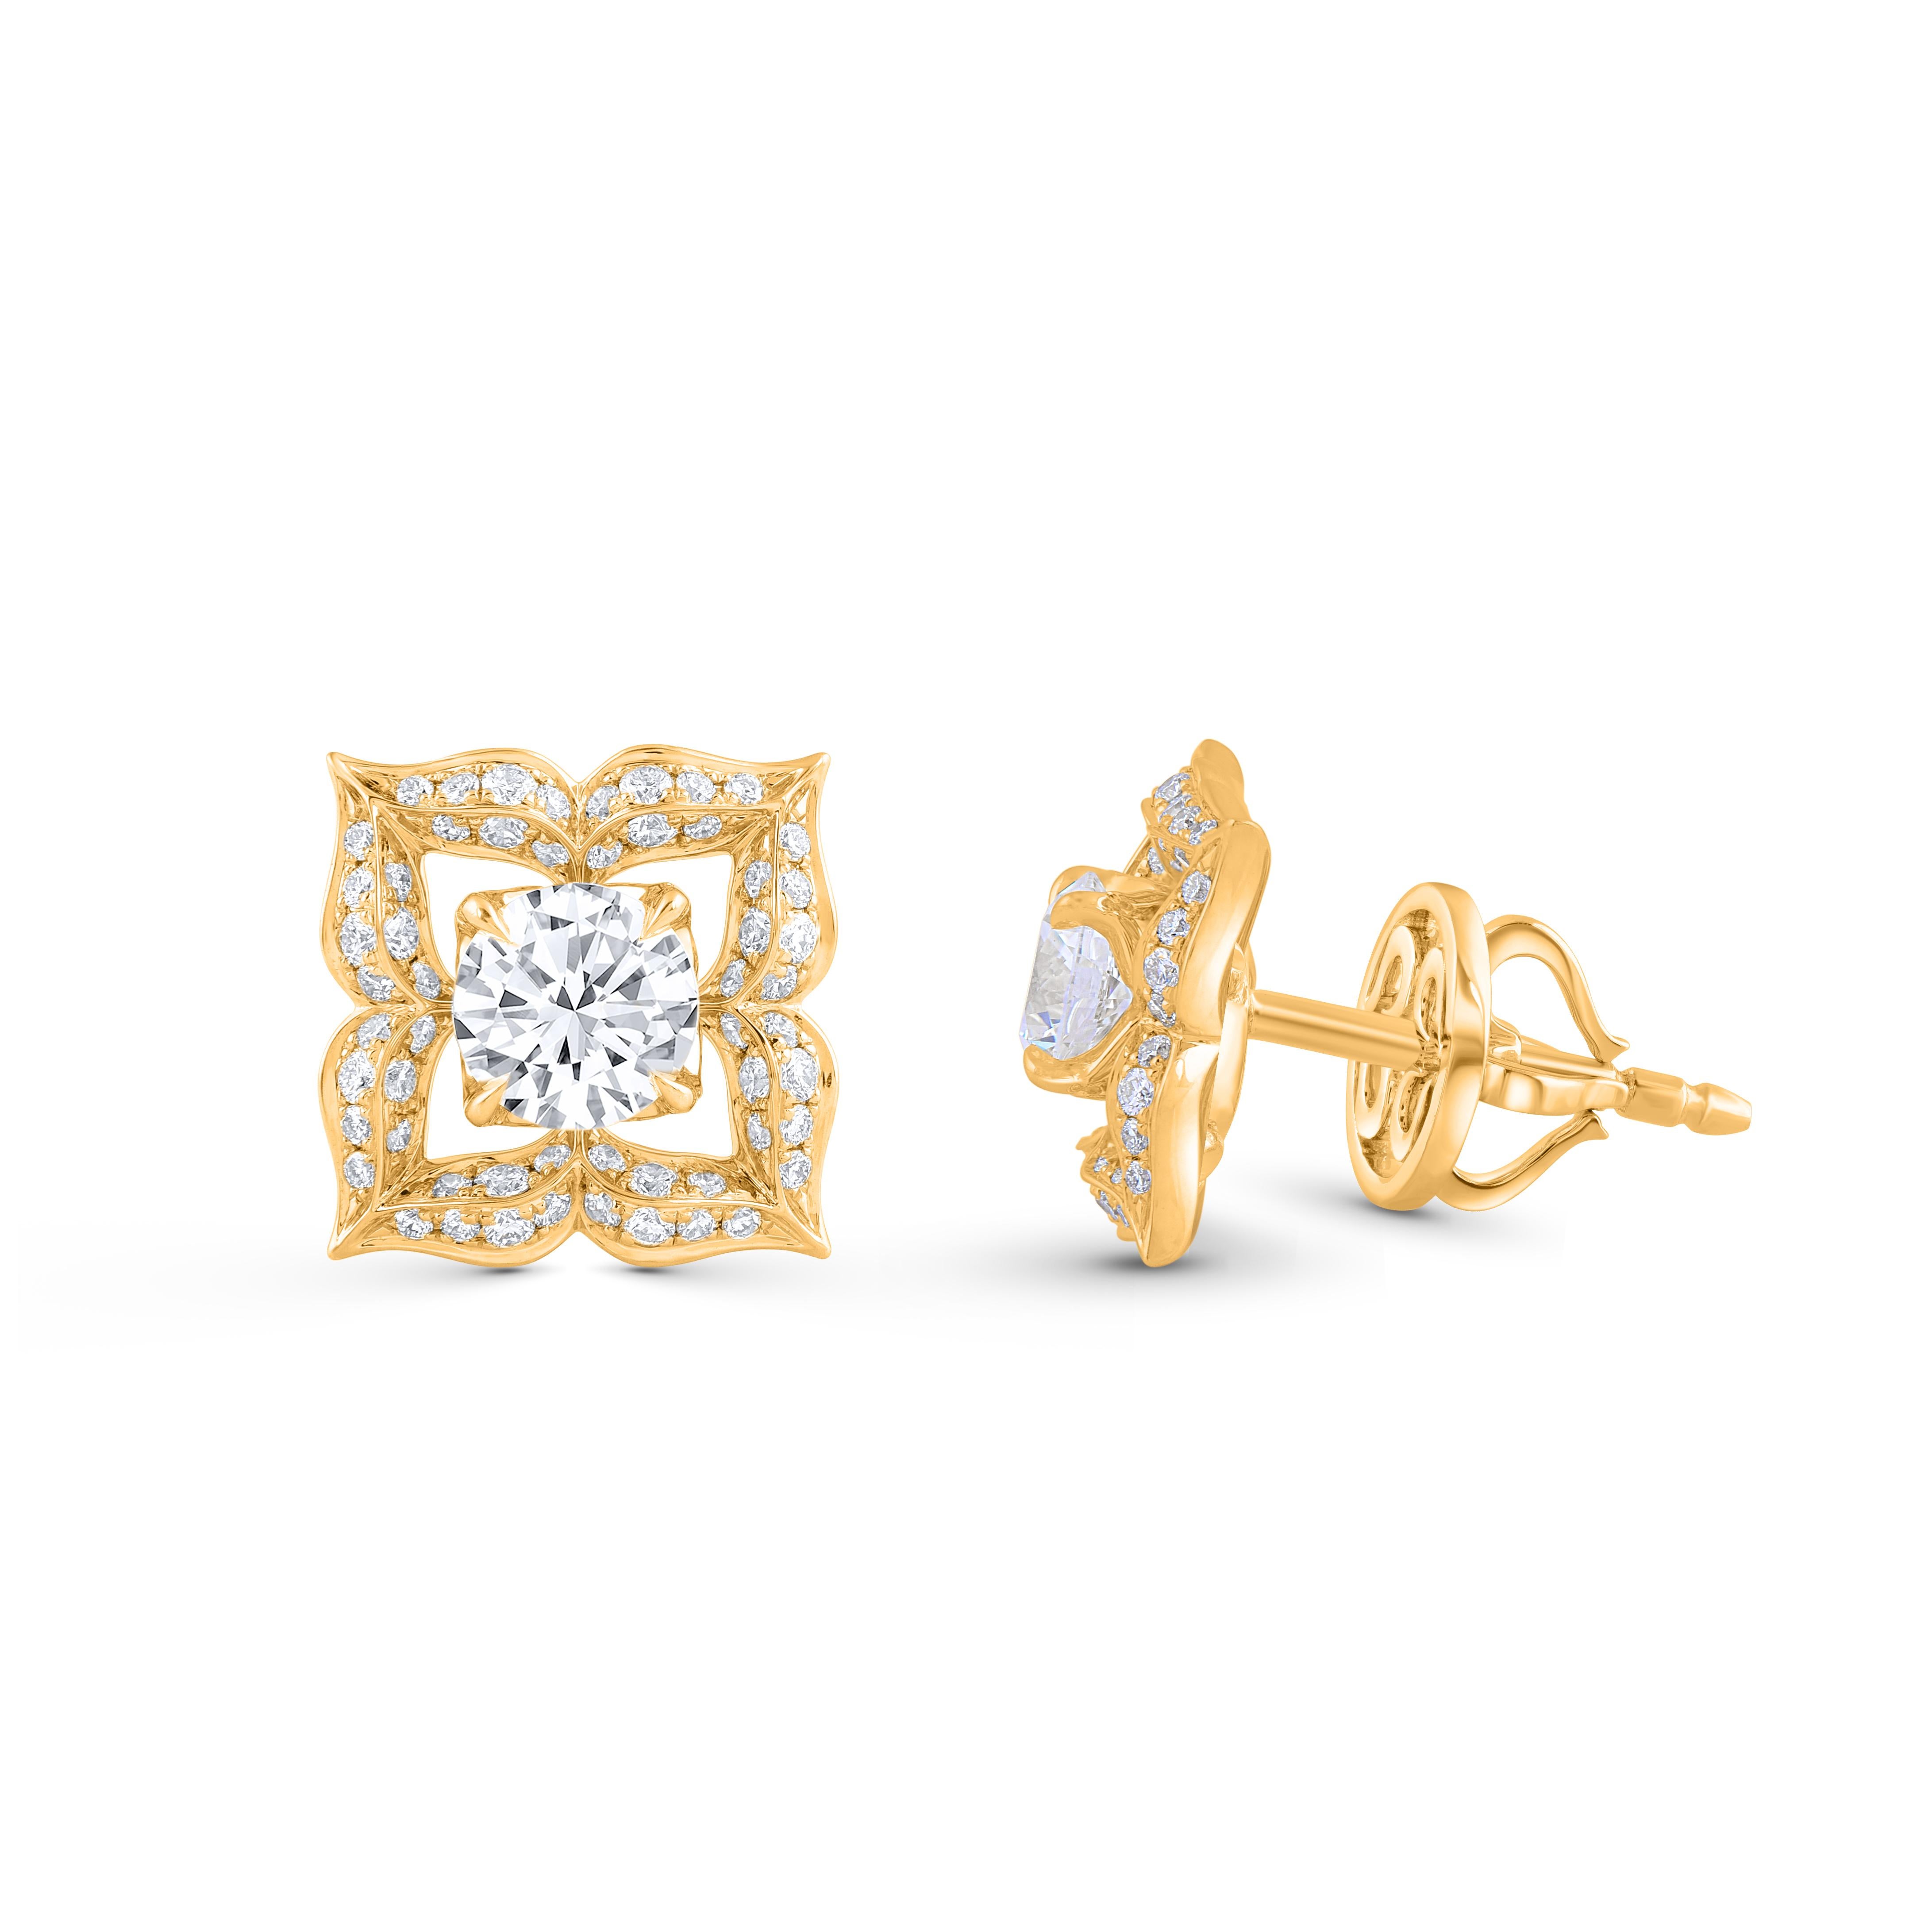 These beautiful earrings are studded with 114 brilliant cut round diamonds. The total diamond weight of these diamond earrings is 0.45 carats. All the diamonds are D-F color, IF-VS clarity. The yellow gold stud earrings will come along with a 